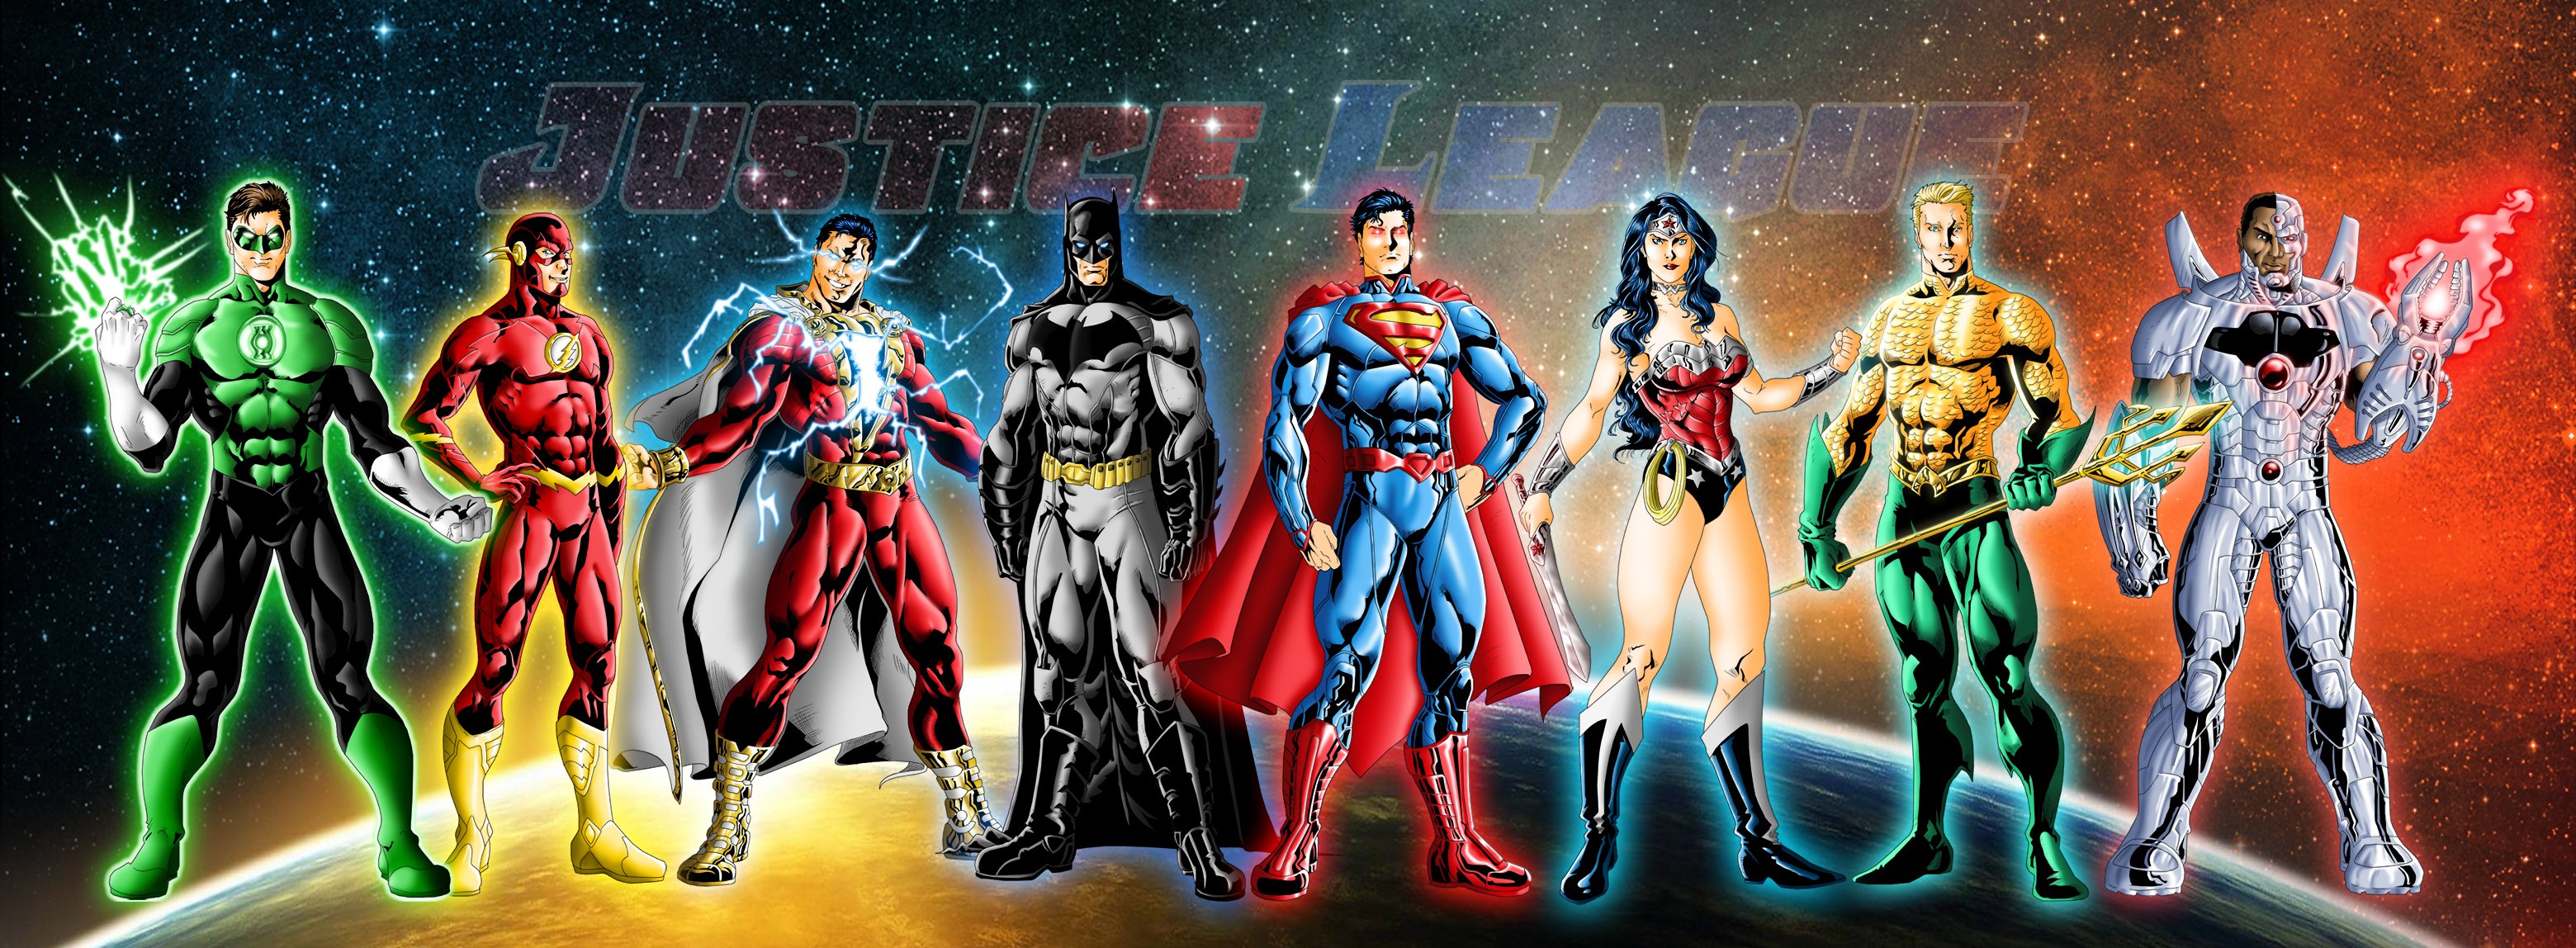 New 52 Justice League by JeanSinclairArts on